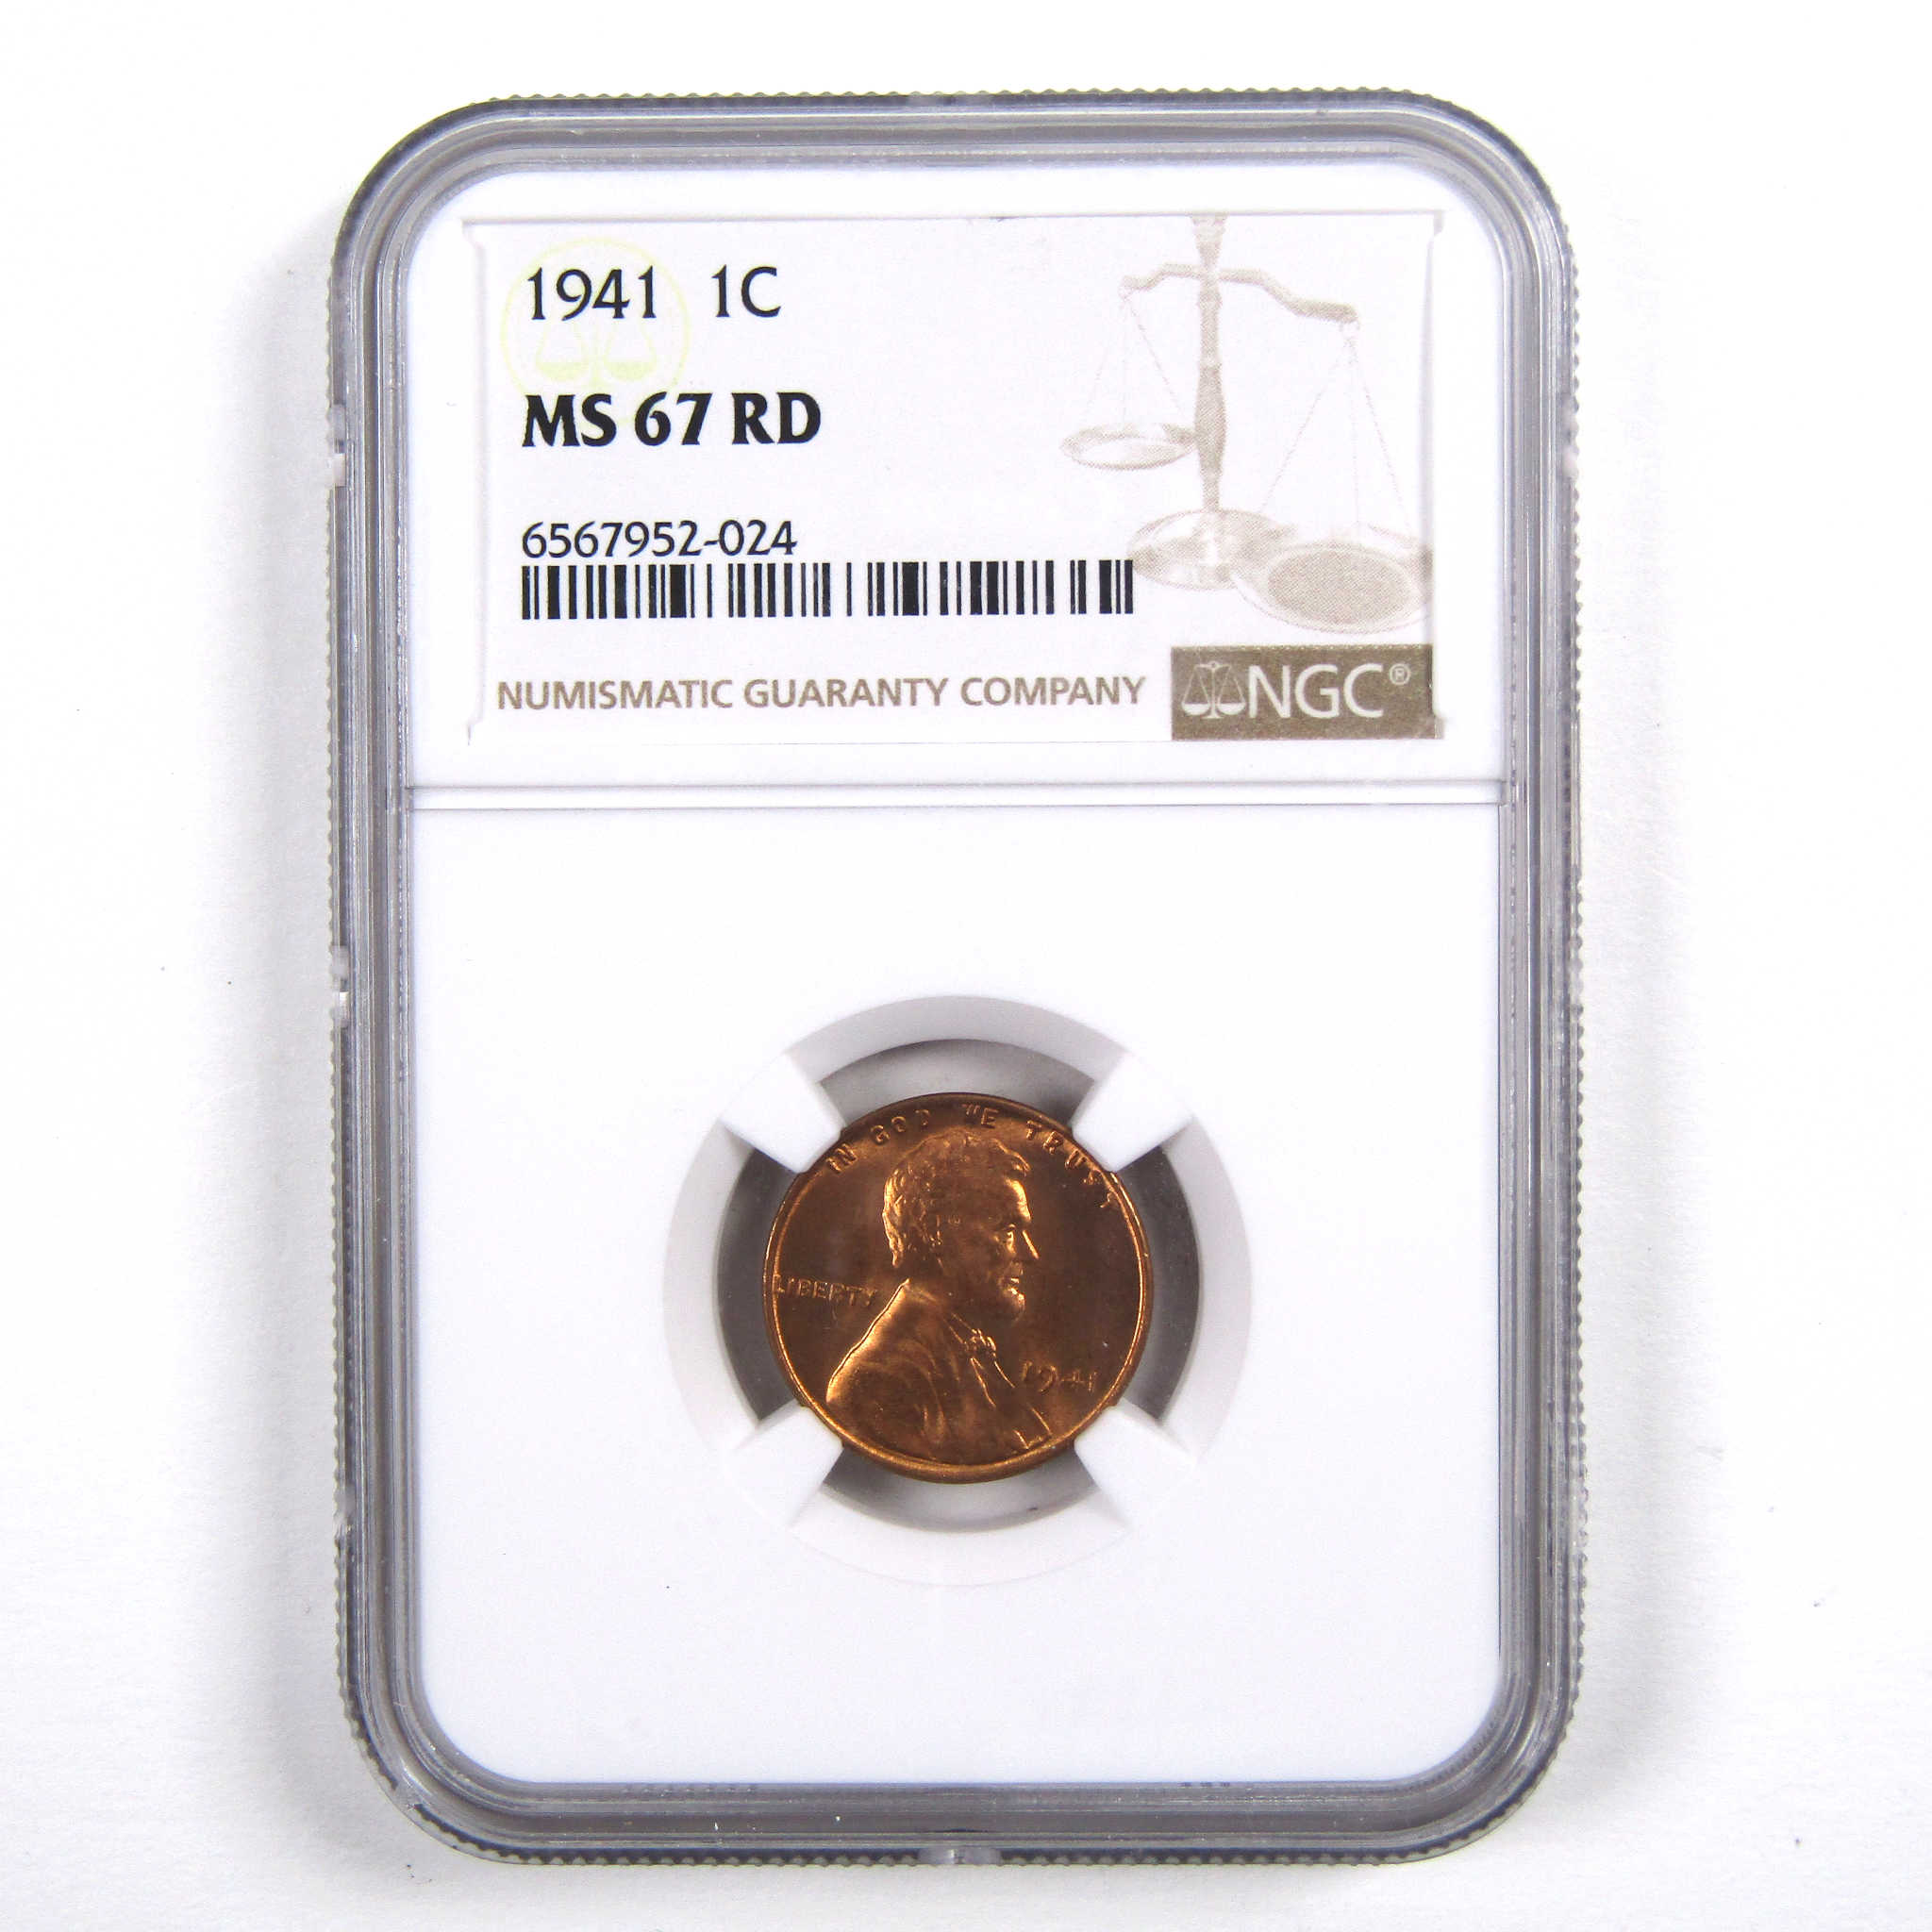 1941 Lincoln Wheat Cent MS 67 RD NGC Penny 1c Uncirculated SKU:I3157